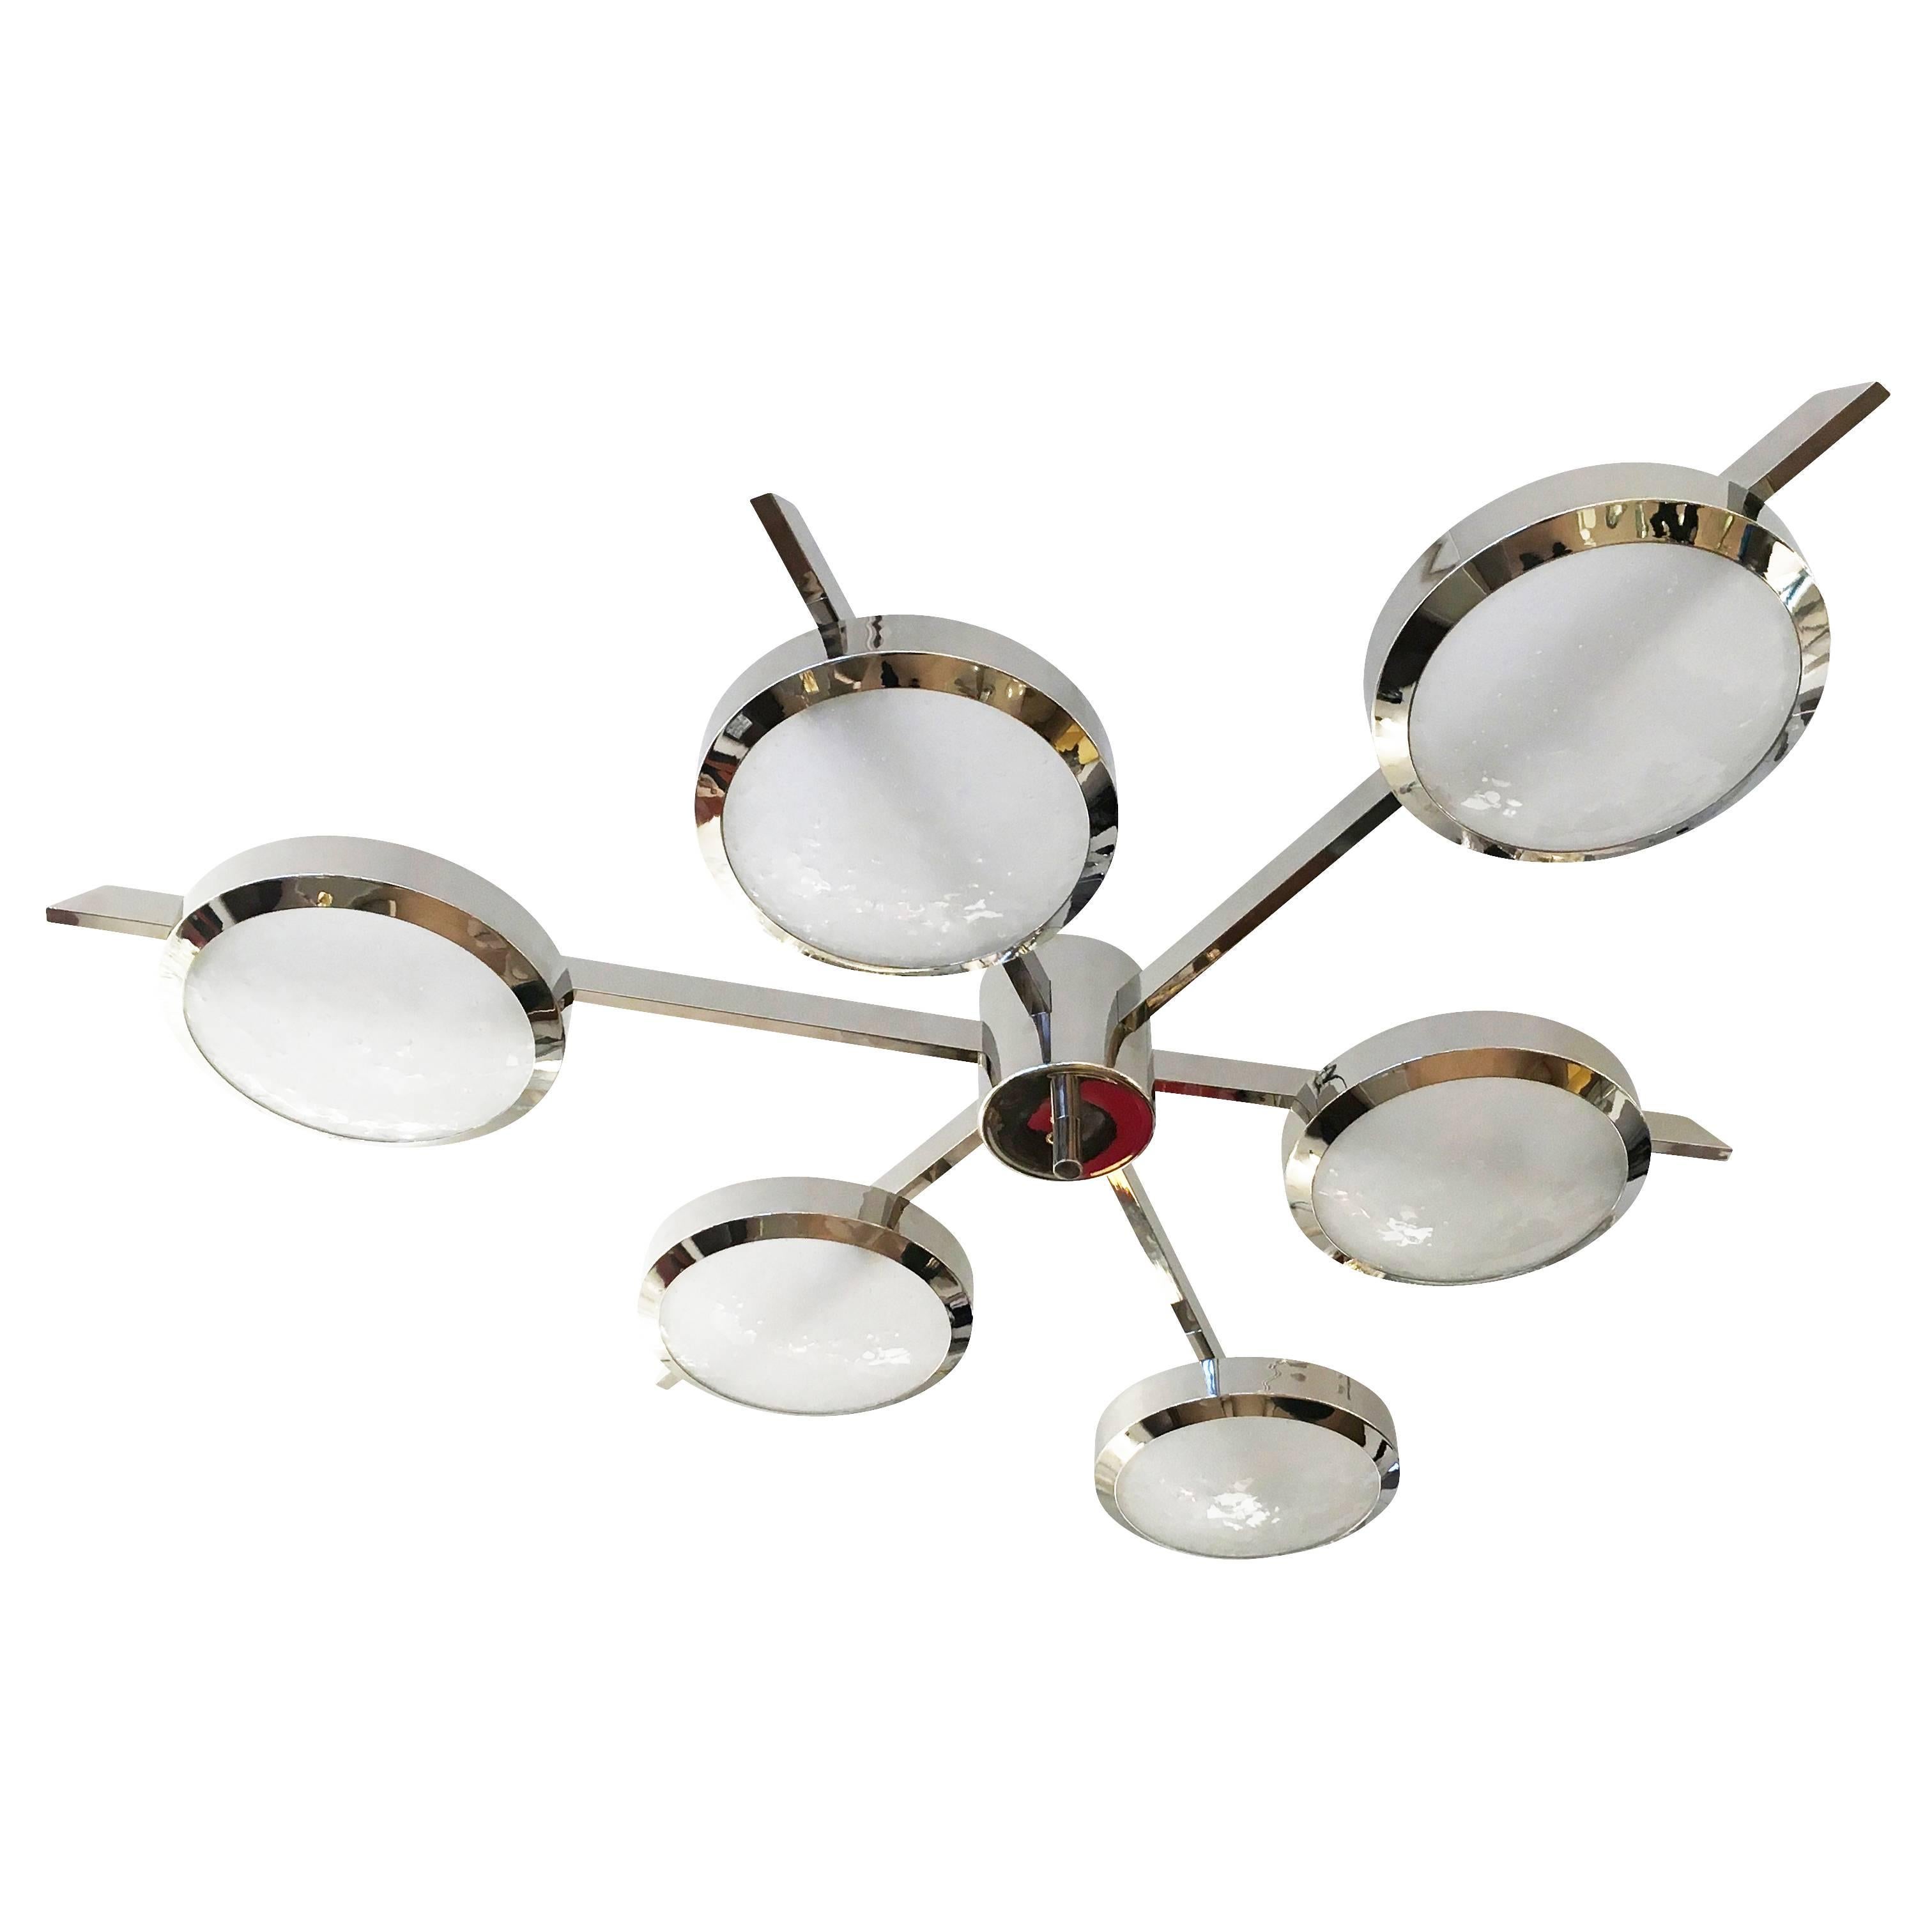 The Sei ceiling light is characterized by its star shaped frame with six suspended Murano glass shades. Shown as a flush mount in the nickel finish with our signature Murano bubble glass. Listed price is for the stock model in polished